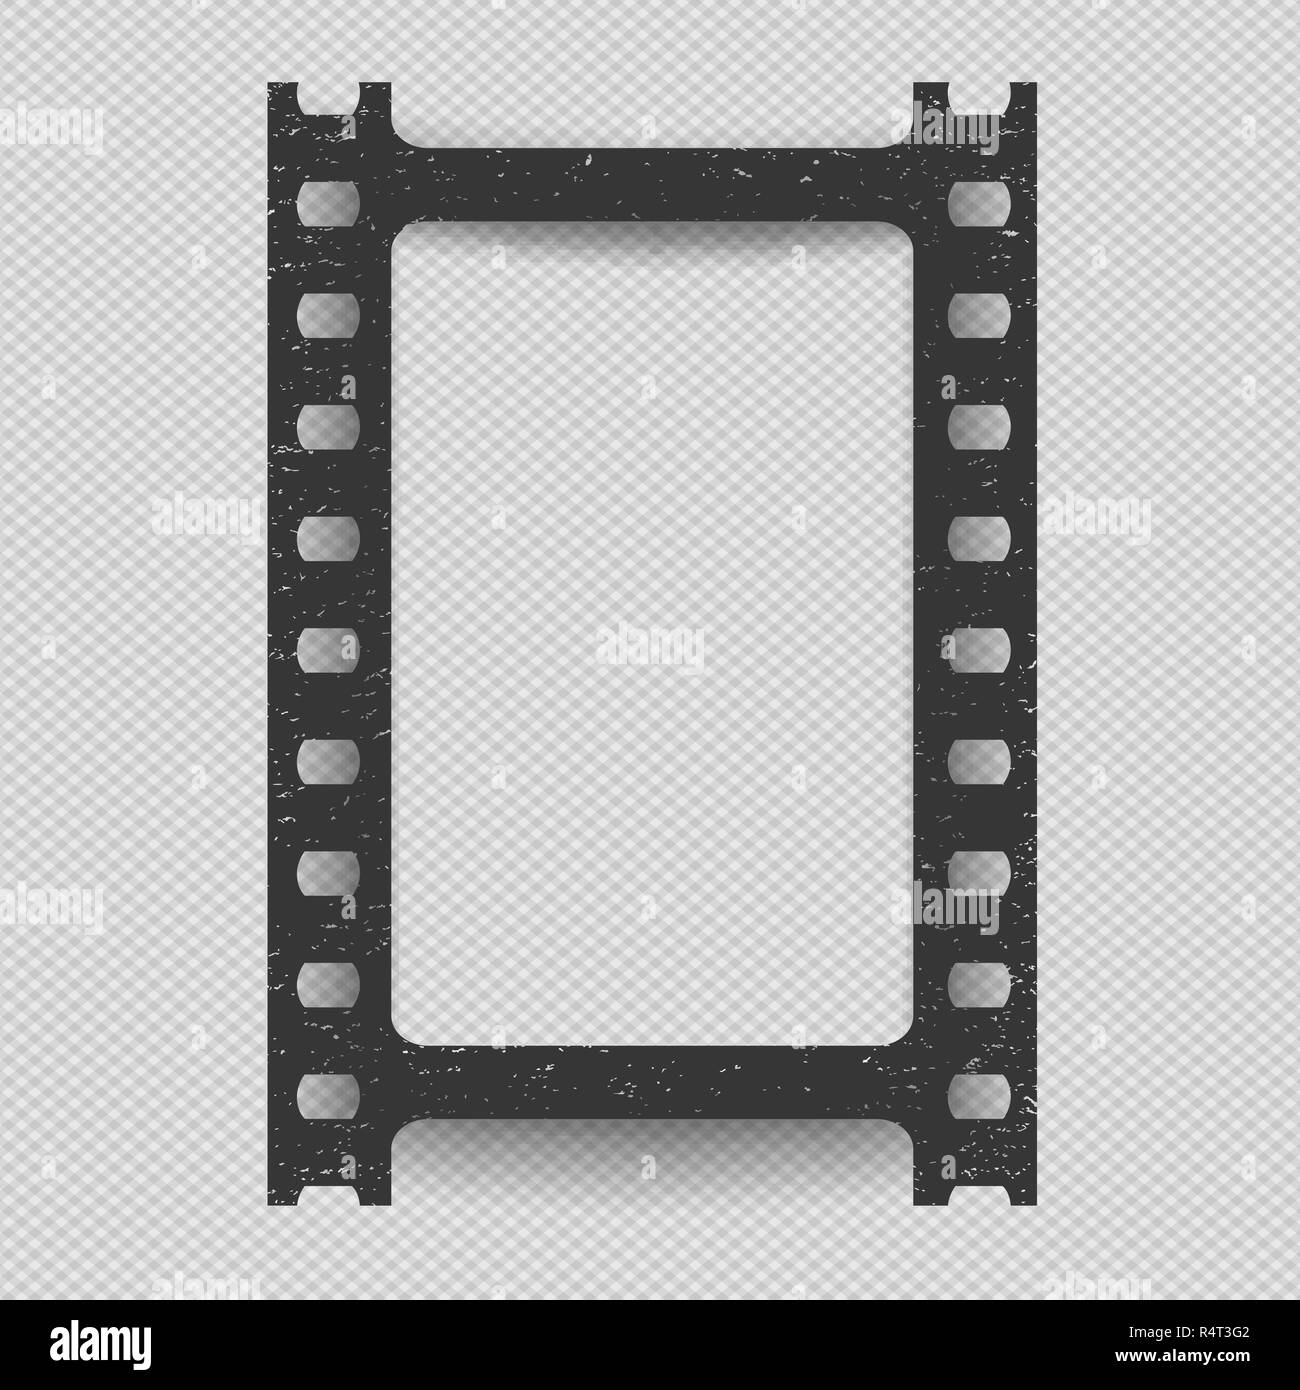 Black vertical scratched grunge film strip with shadow on squared background. Vector illustration. Stock Vector